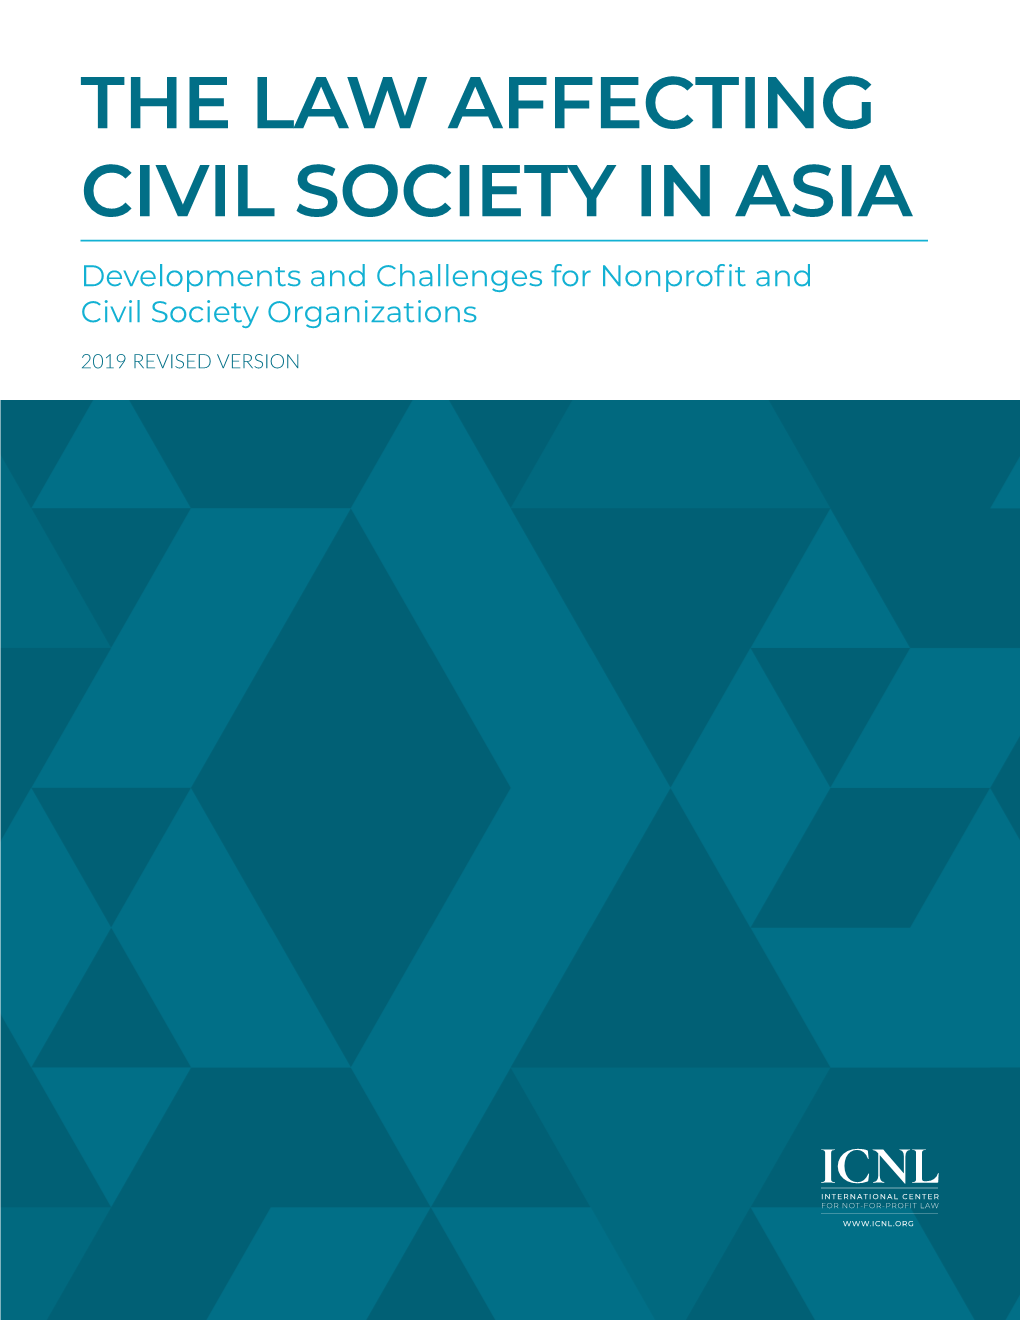 THE LAW AFFECTING CIVIL SOCIETY in ASIA Developments and Challenges for Nonprofit and Civil Society Organizations